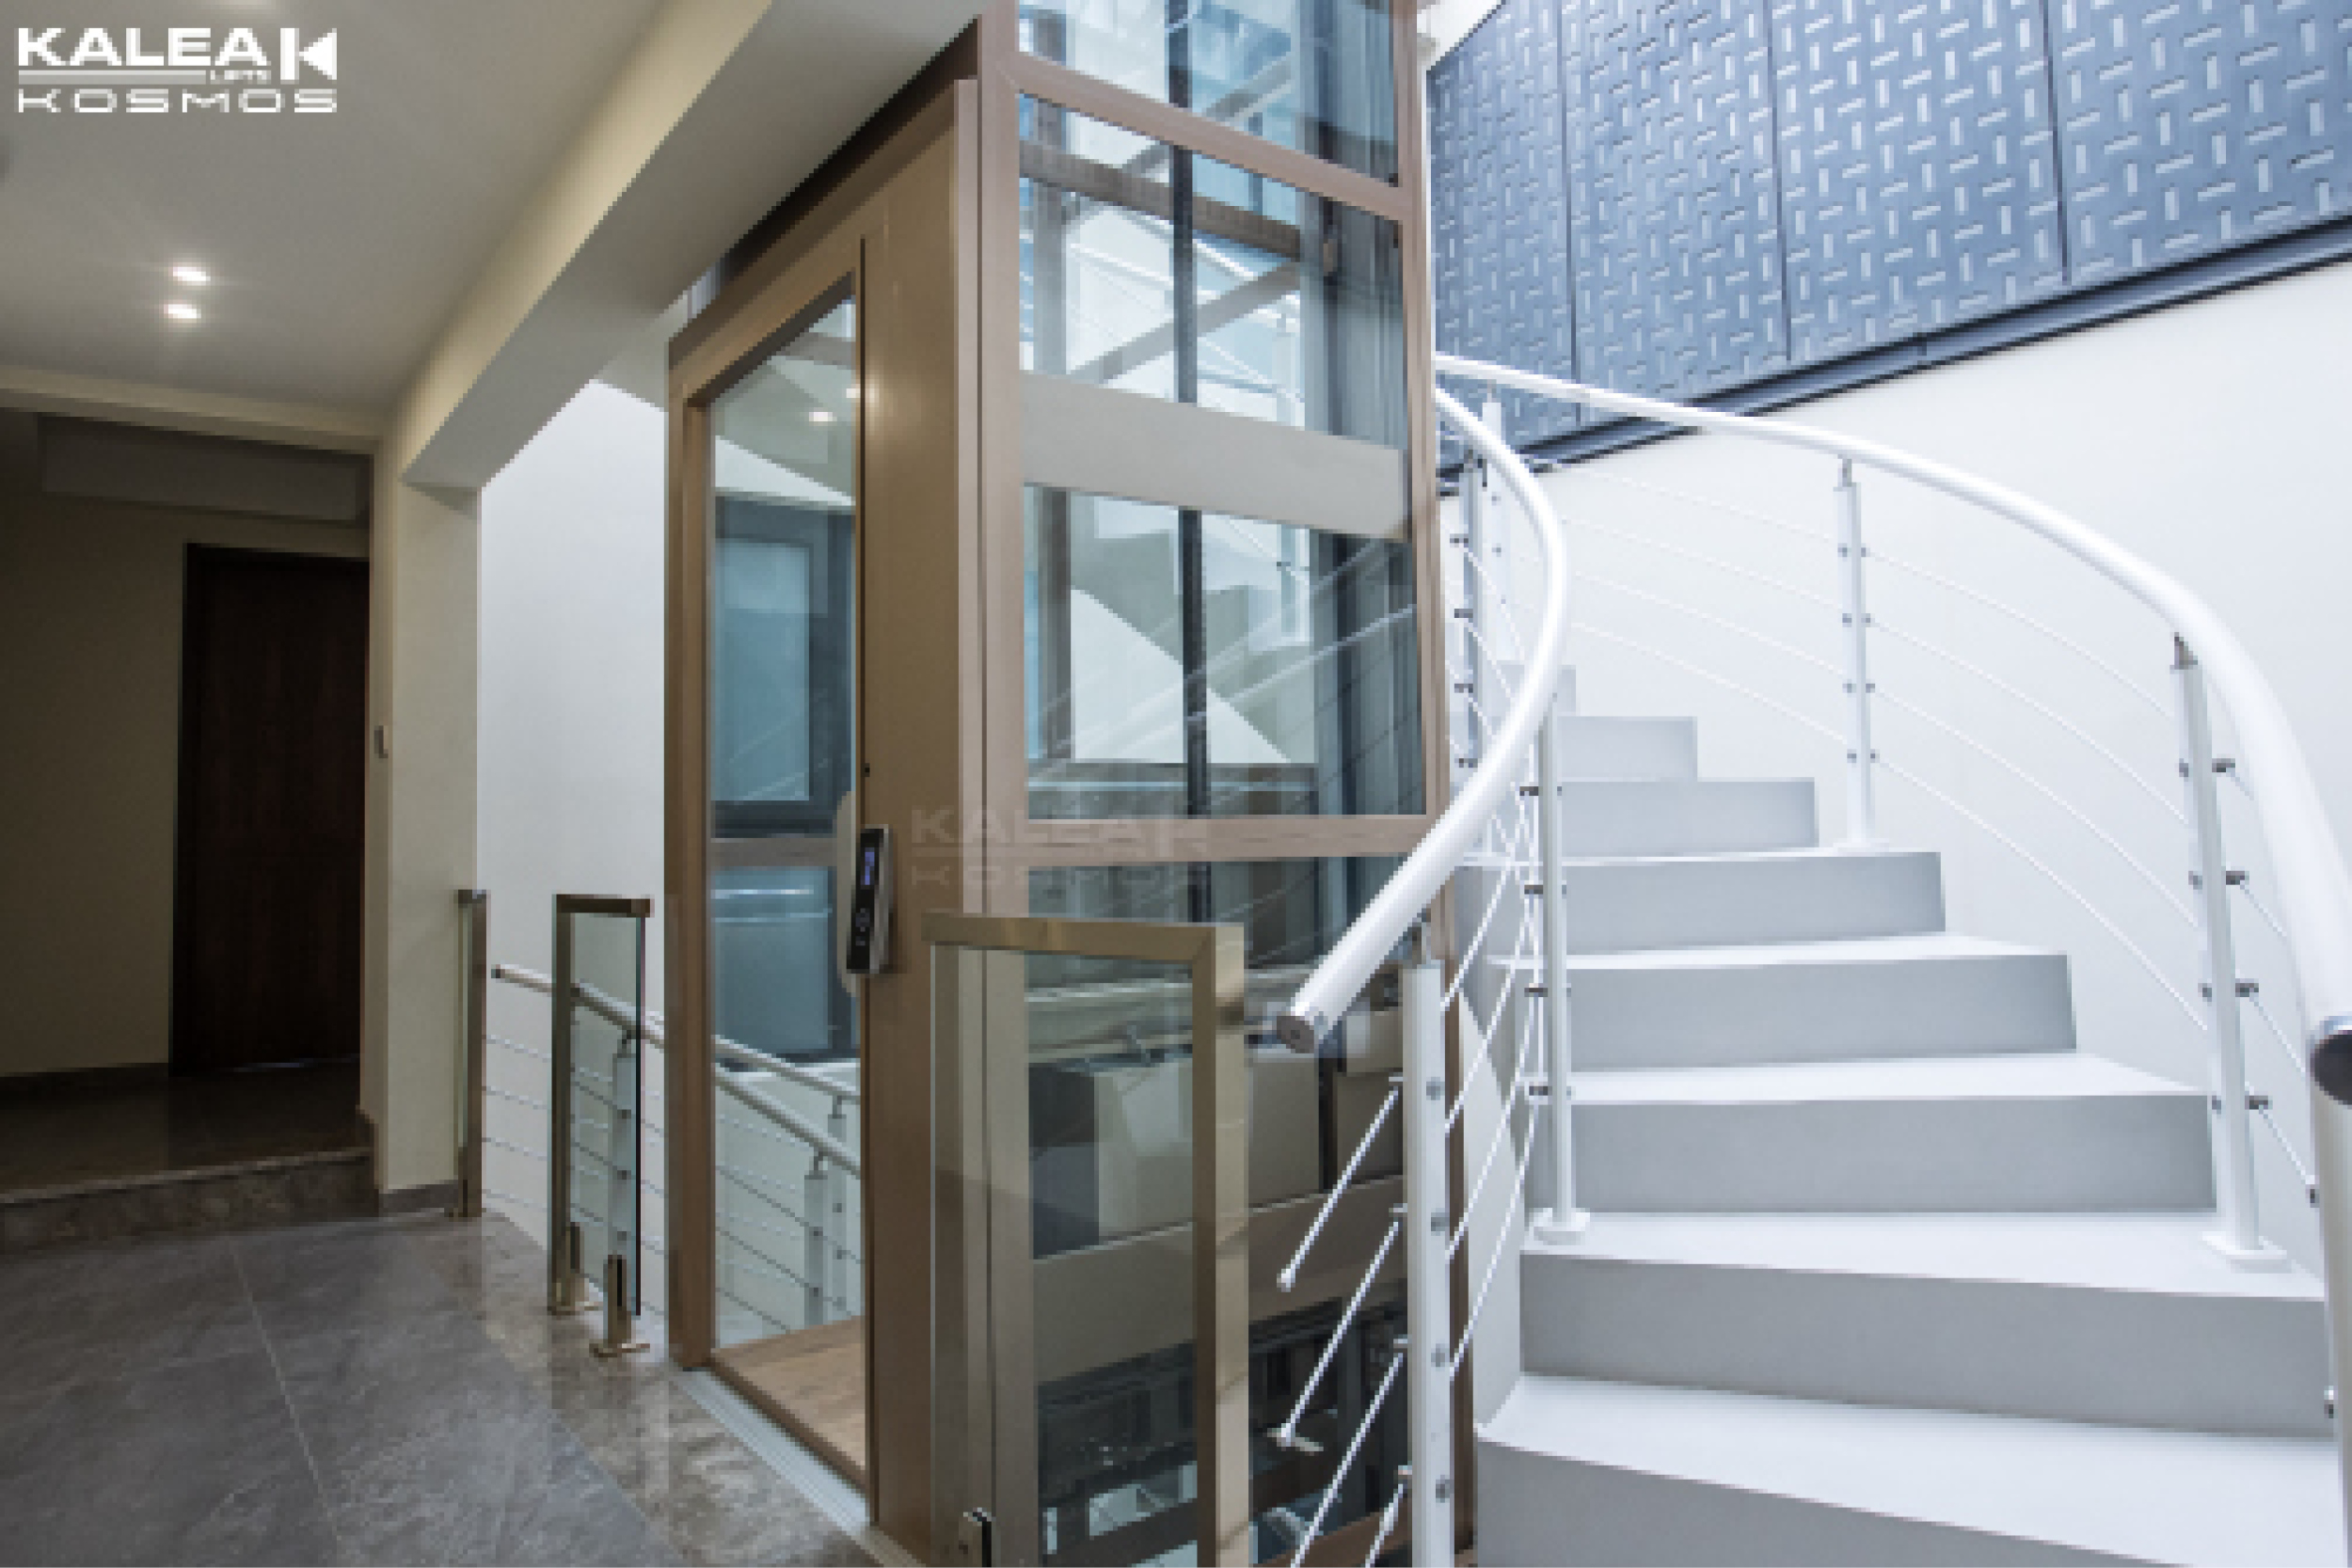 Private Home Middle Of Stair,Kosmos K70 model, All Glass Shaft Powder Coated Roman Gold